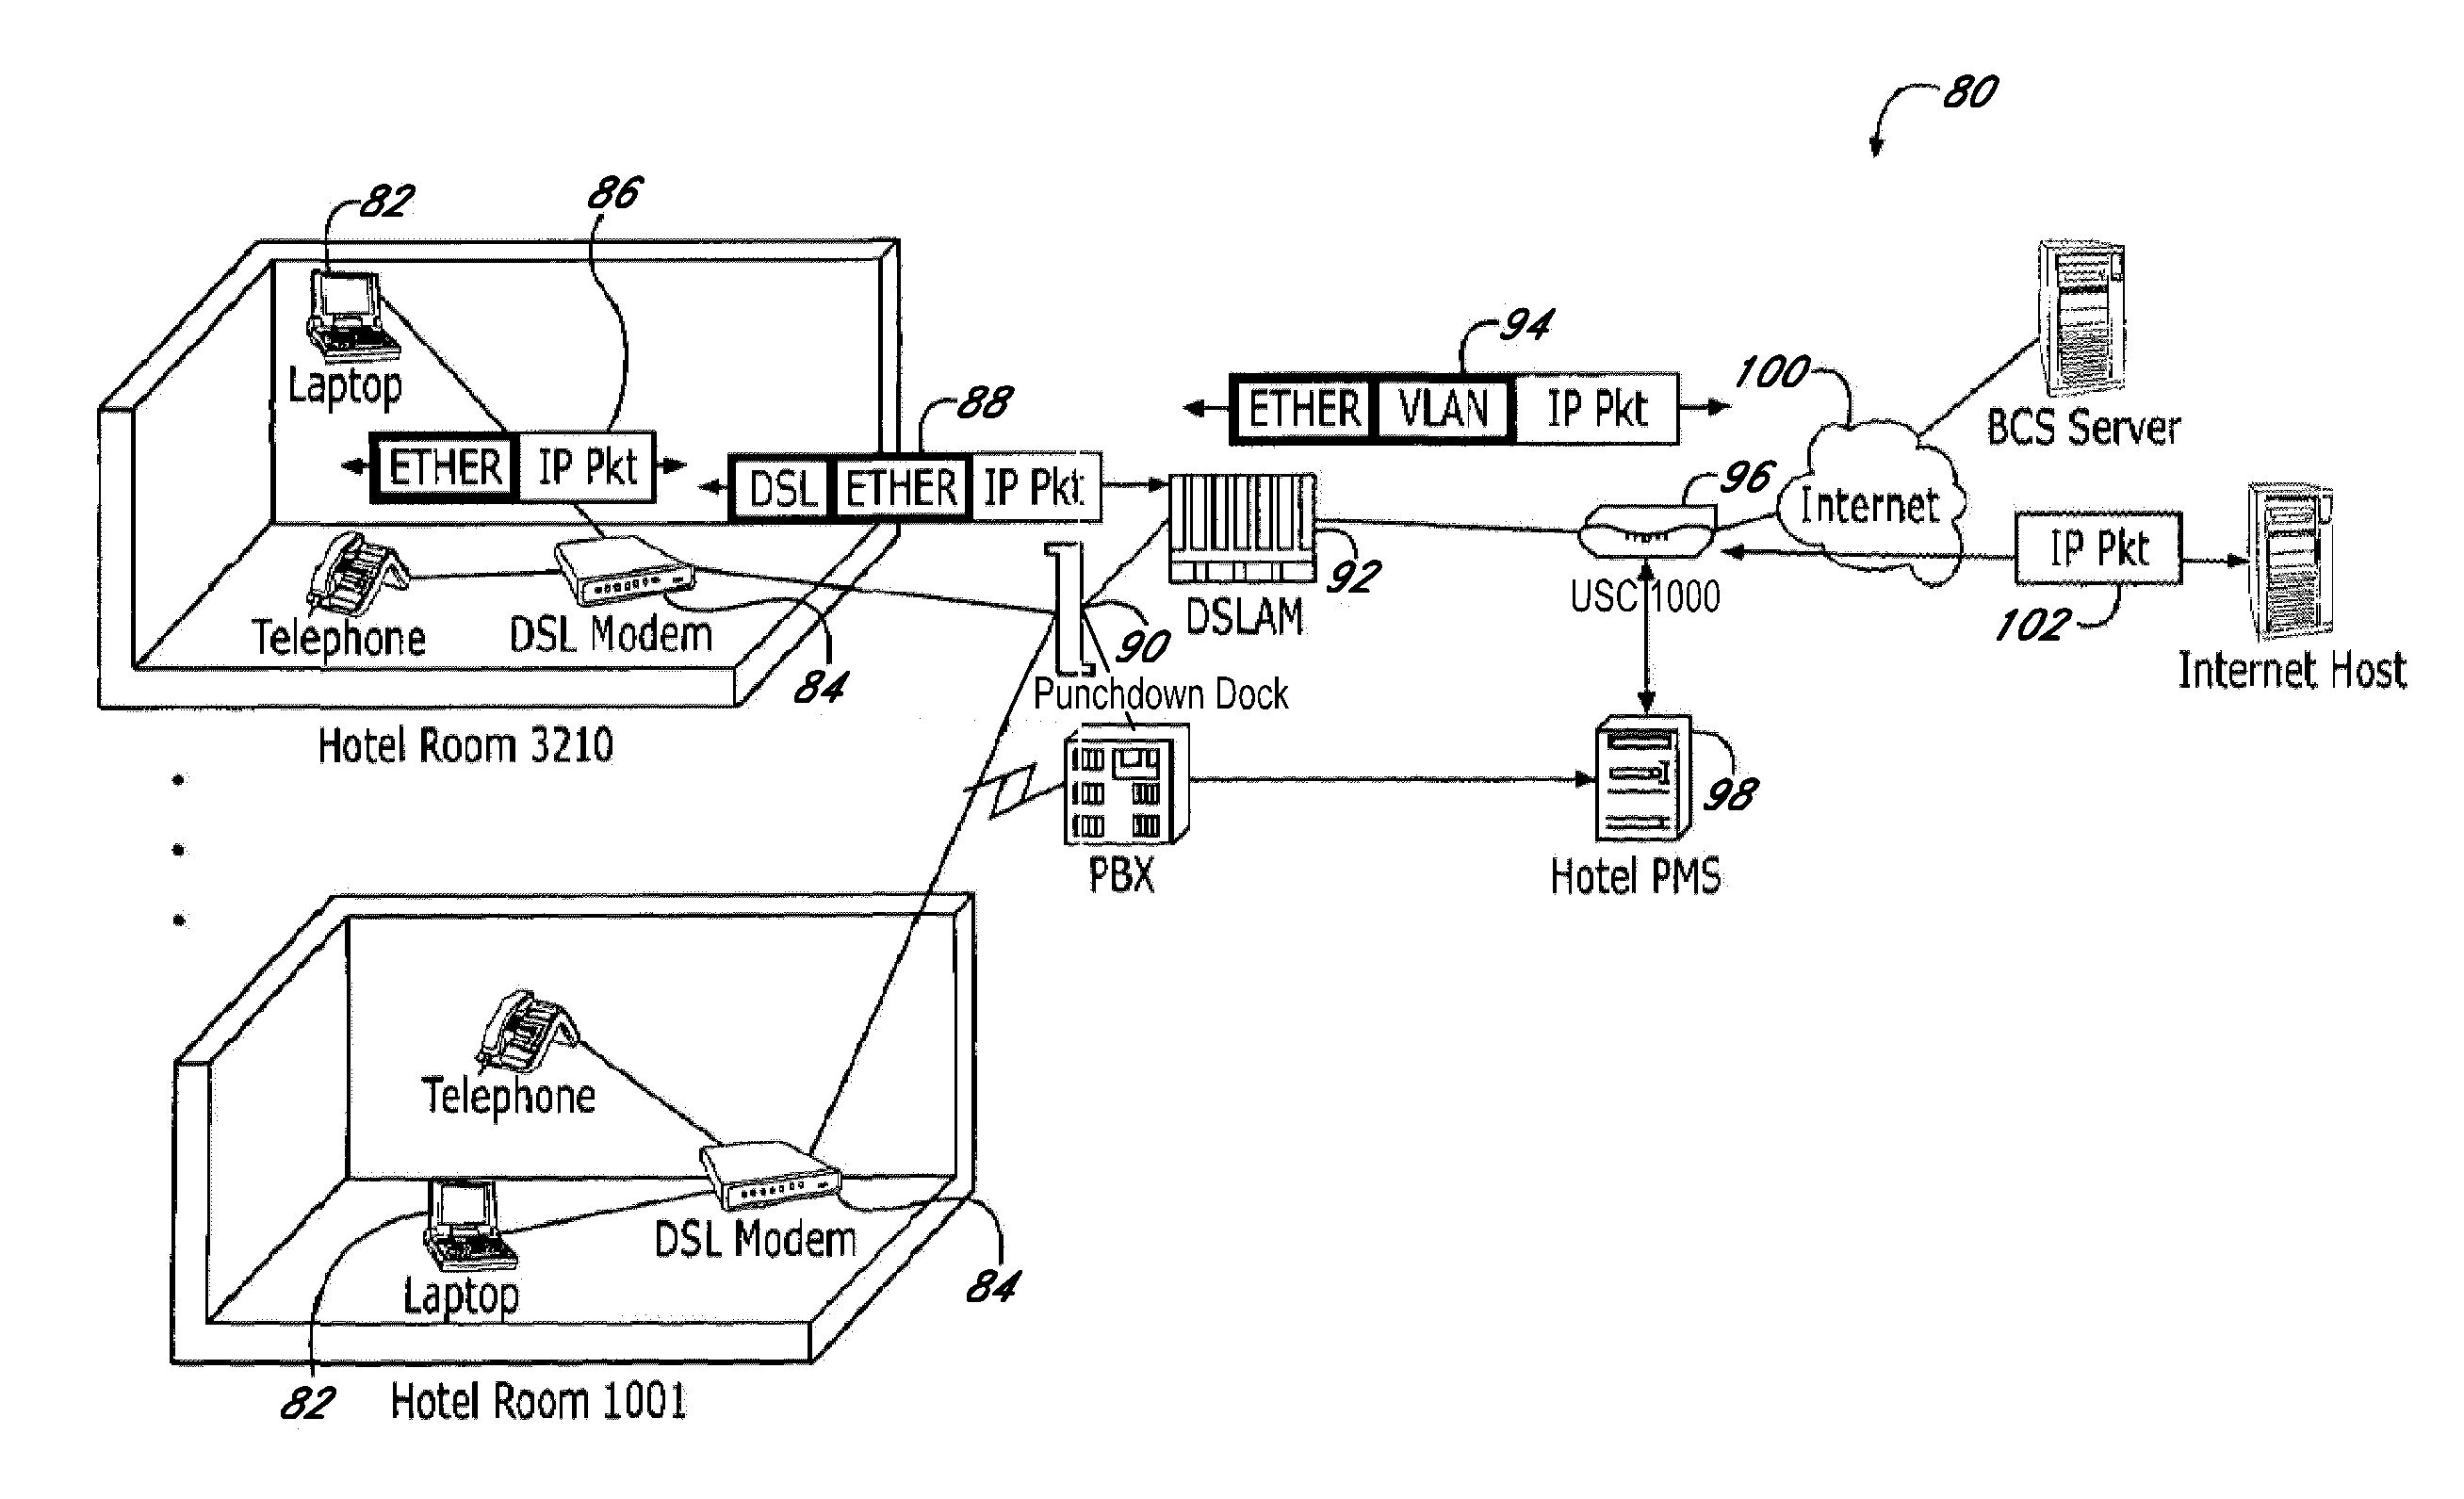 Systems and methods for providing content and services on a network system